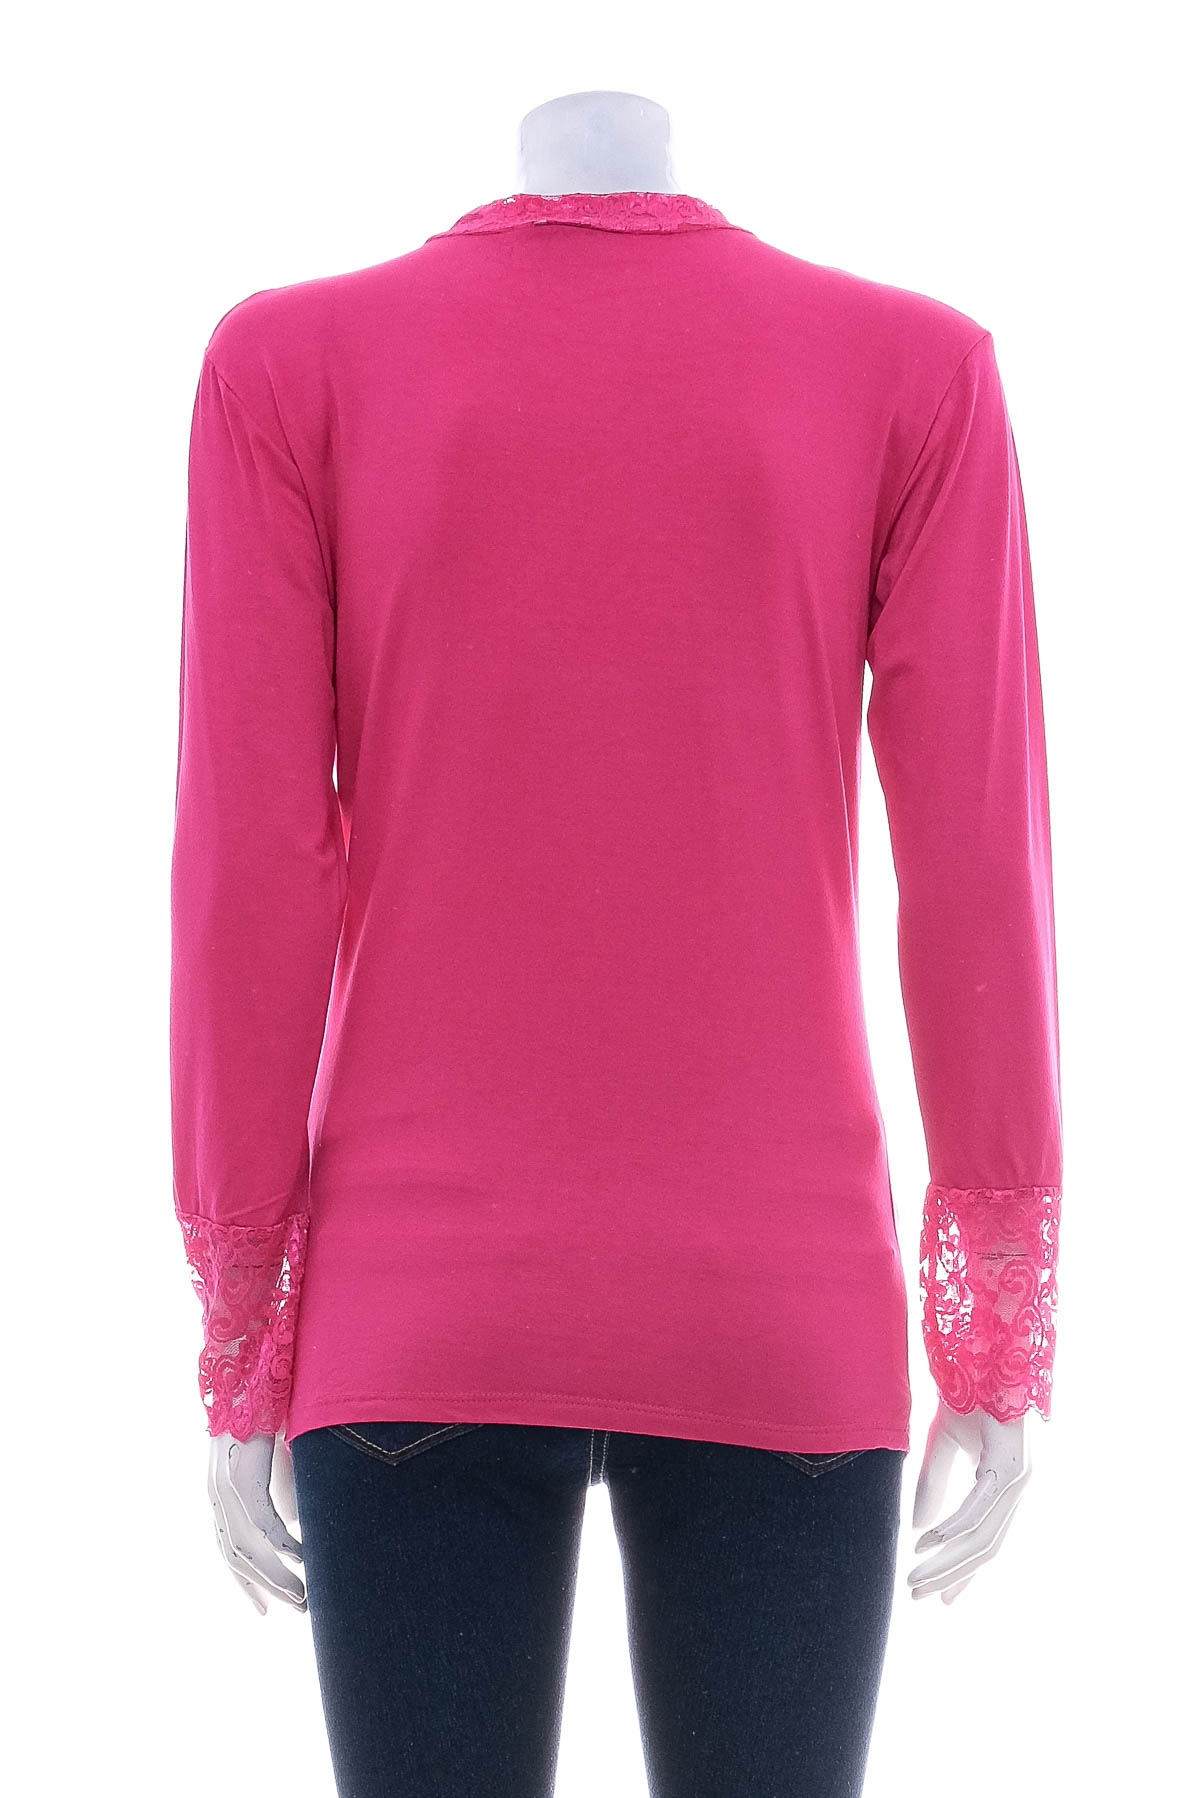 Women's blouse - P.N.R Collection - 1